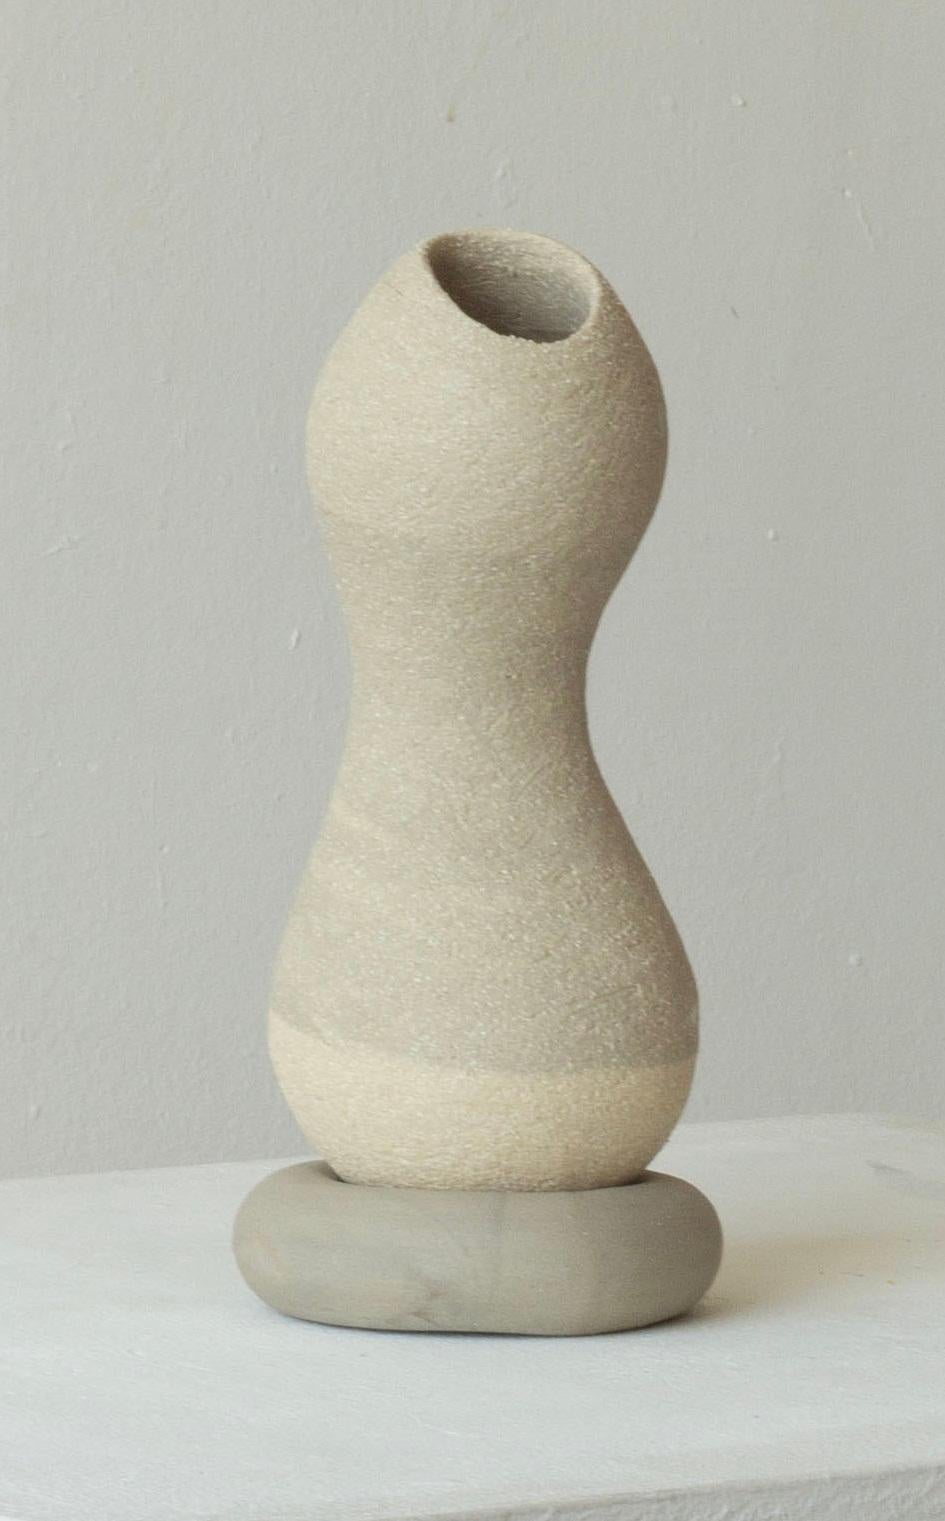 Woman 219 Vase by Karina Smagulova
One of a Kind.
Dimensions: Ø 8 x H 19 cm.
Materials: Grey stoneware.
​
With an Armenian and Kazakhstan heritage, Karina Smagulova was born in Greece in 1995 and graduated with a diploma in Architecture from